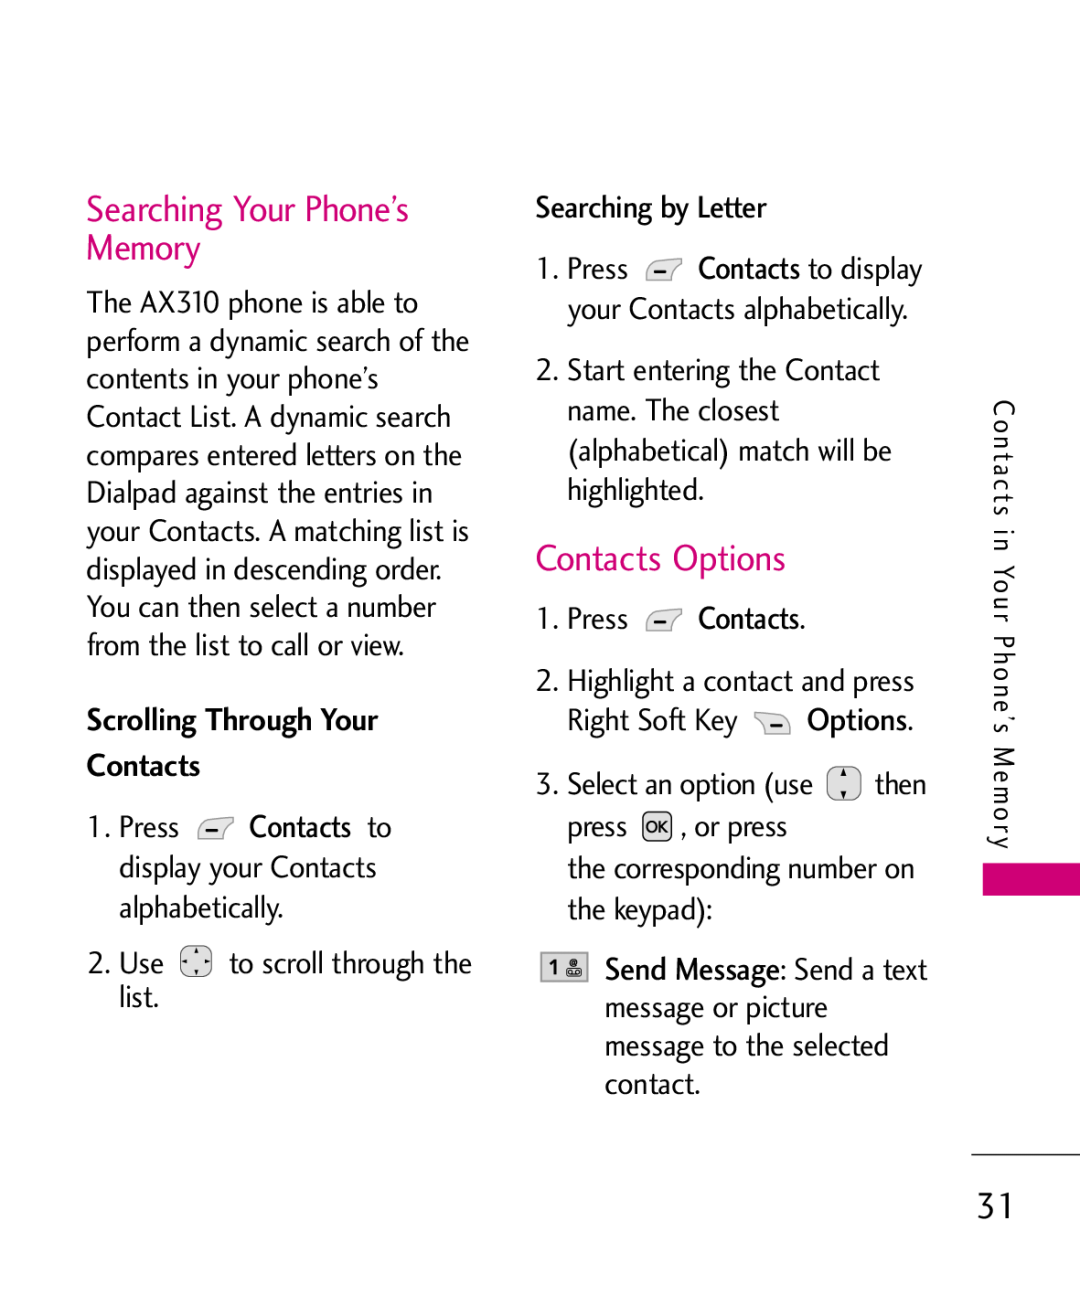 LG Electronics MMBB0347401, AX310 manual Searching Your Phone’s Memory, Contacts Options, Scrolling Through Your Contacts 